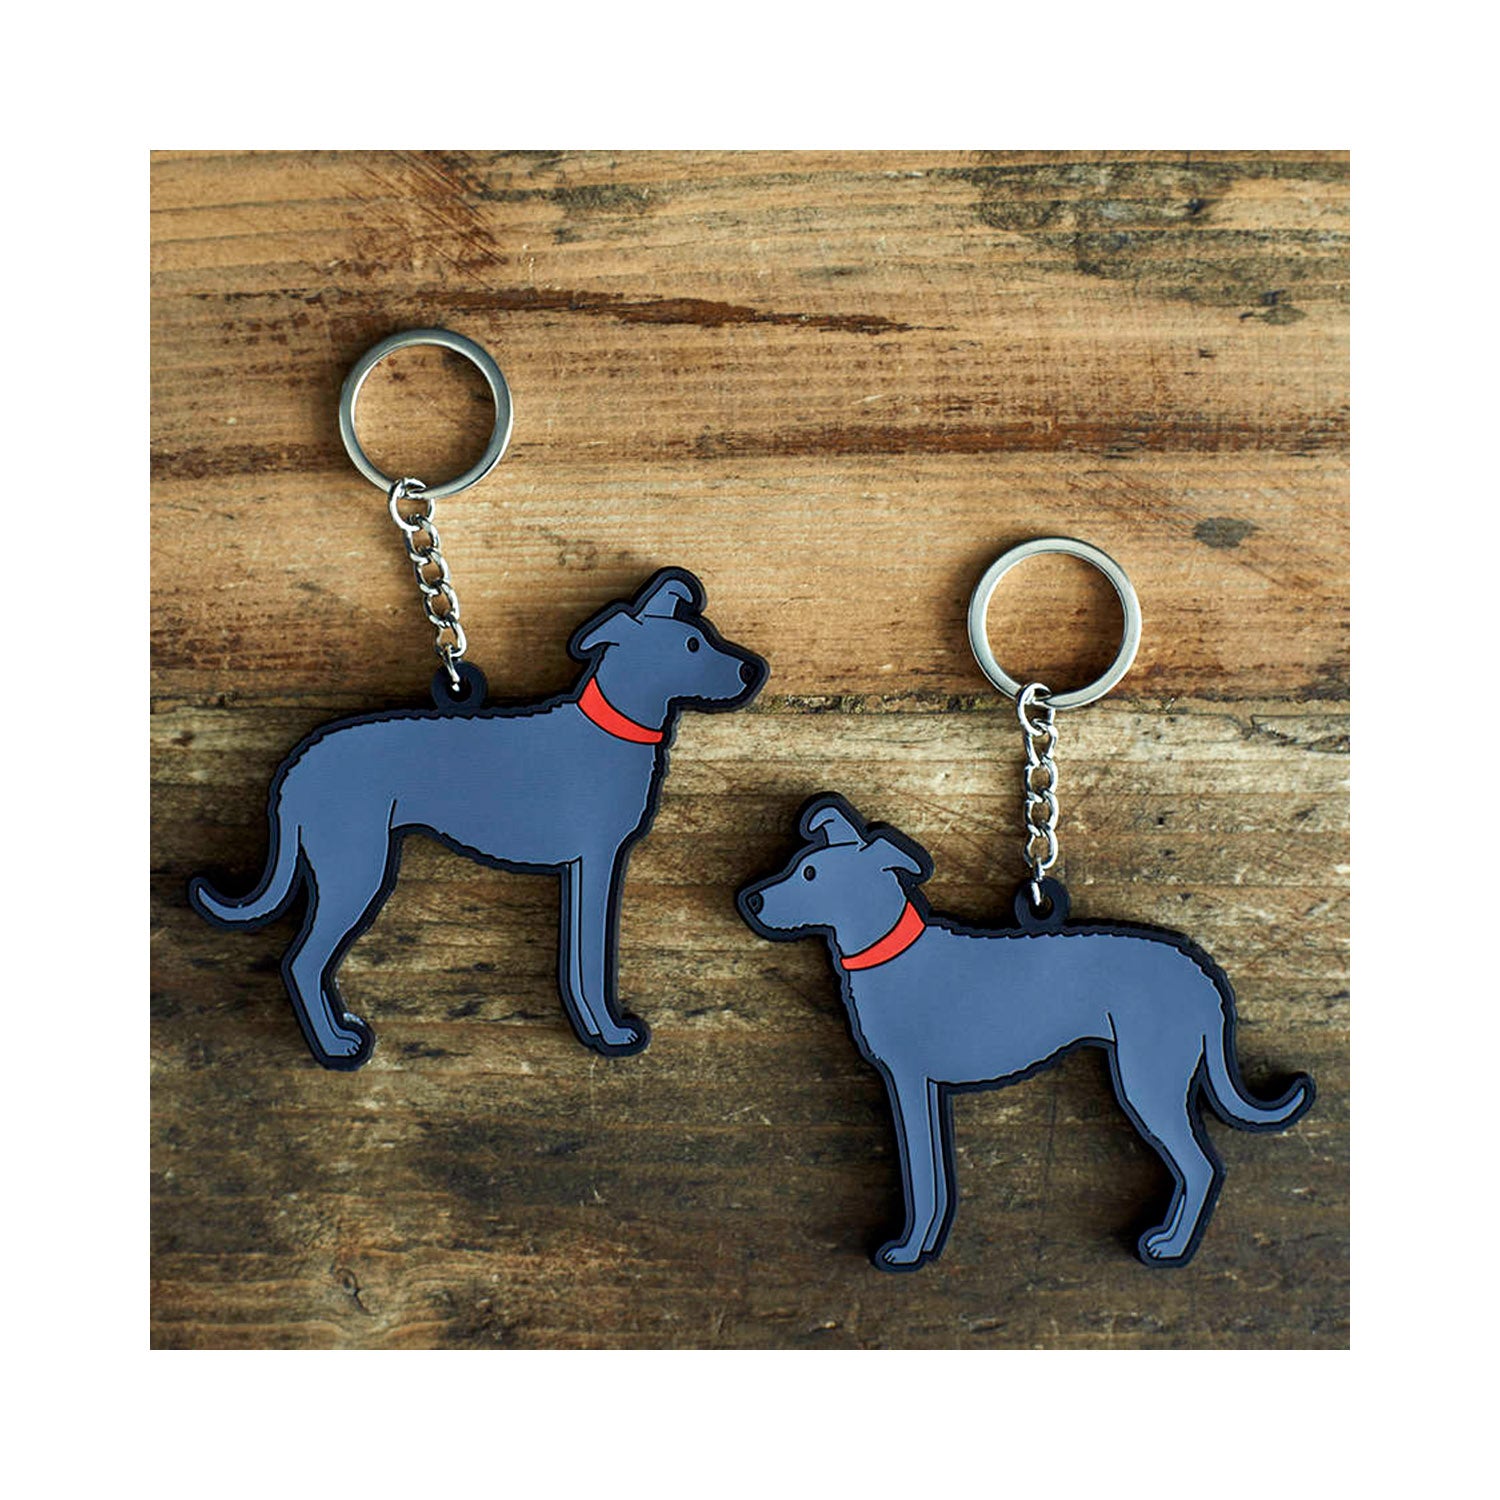 Dog Lover Gifts available at Dog Krazy Gifts - Arthur The Lurcher - part of the Sweet William range available from Dog Krazy Gifts